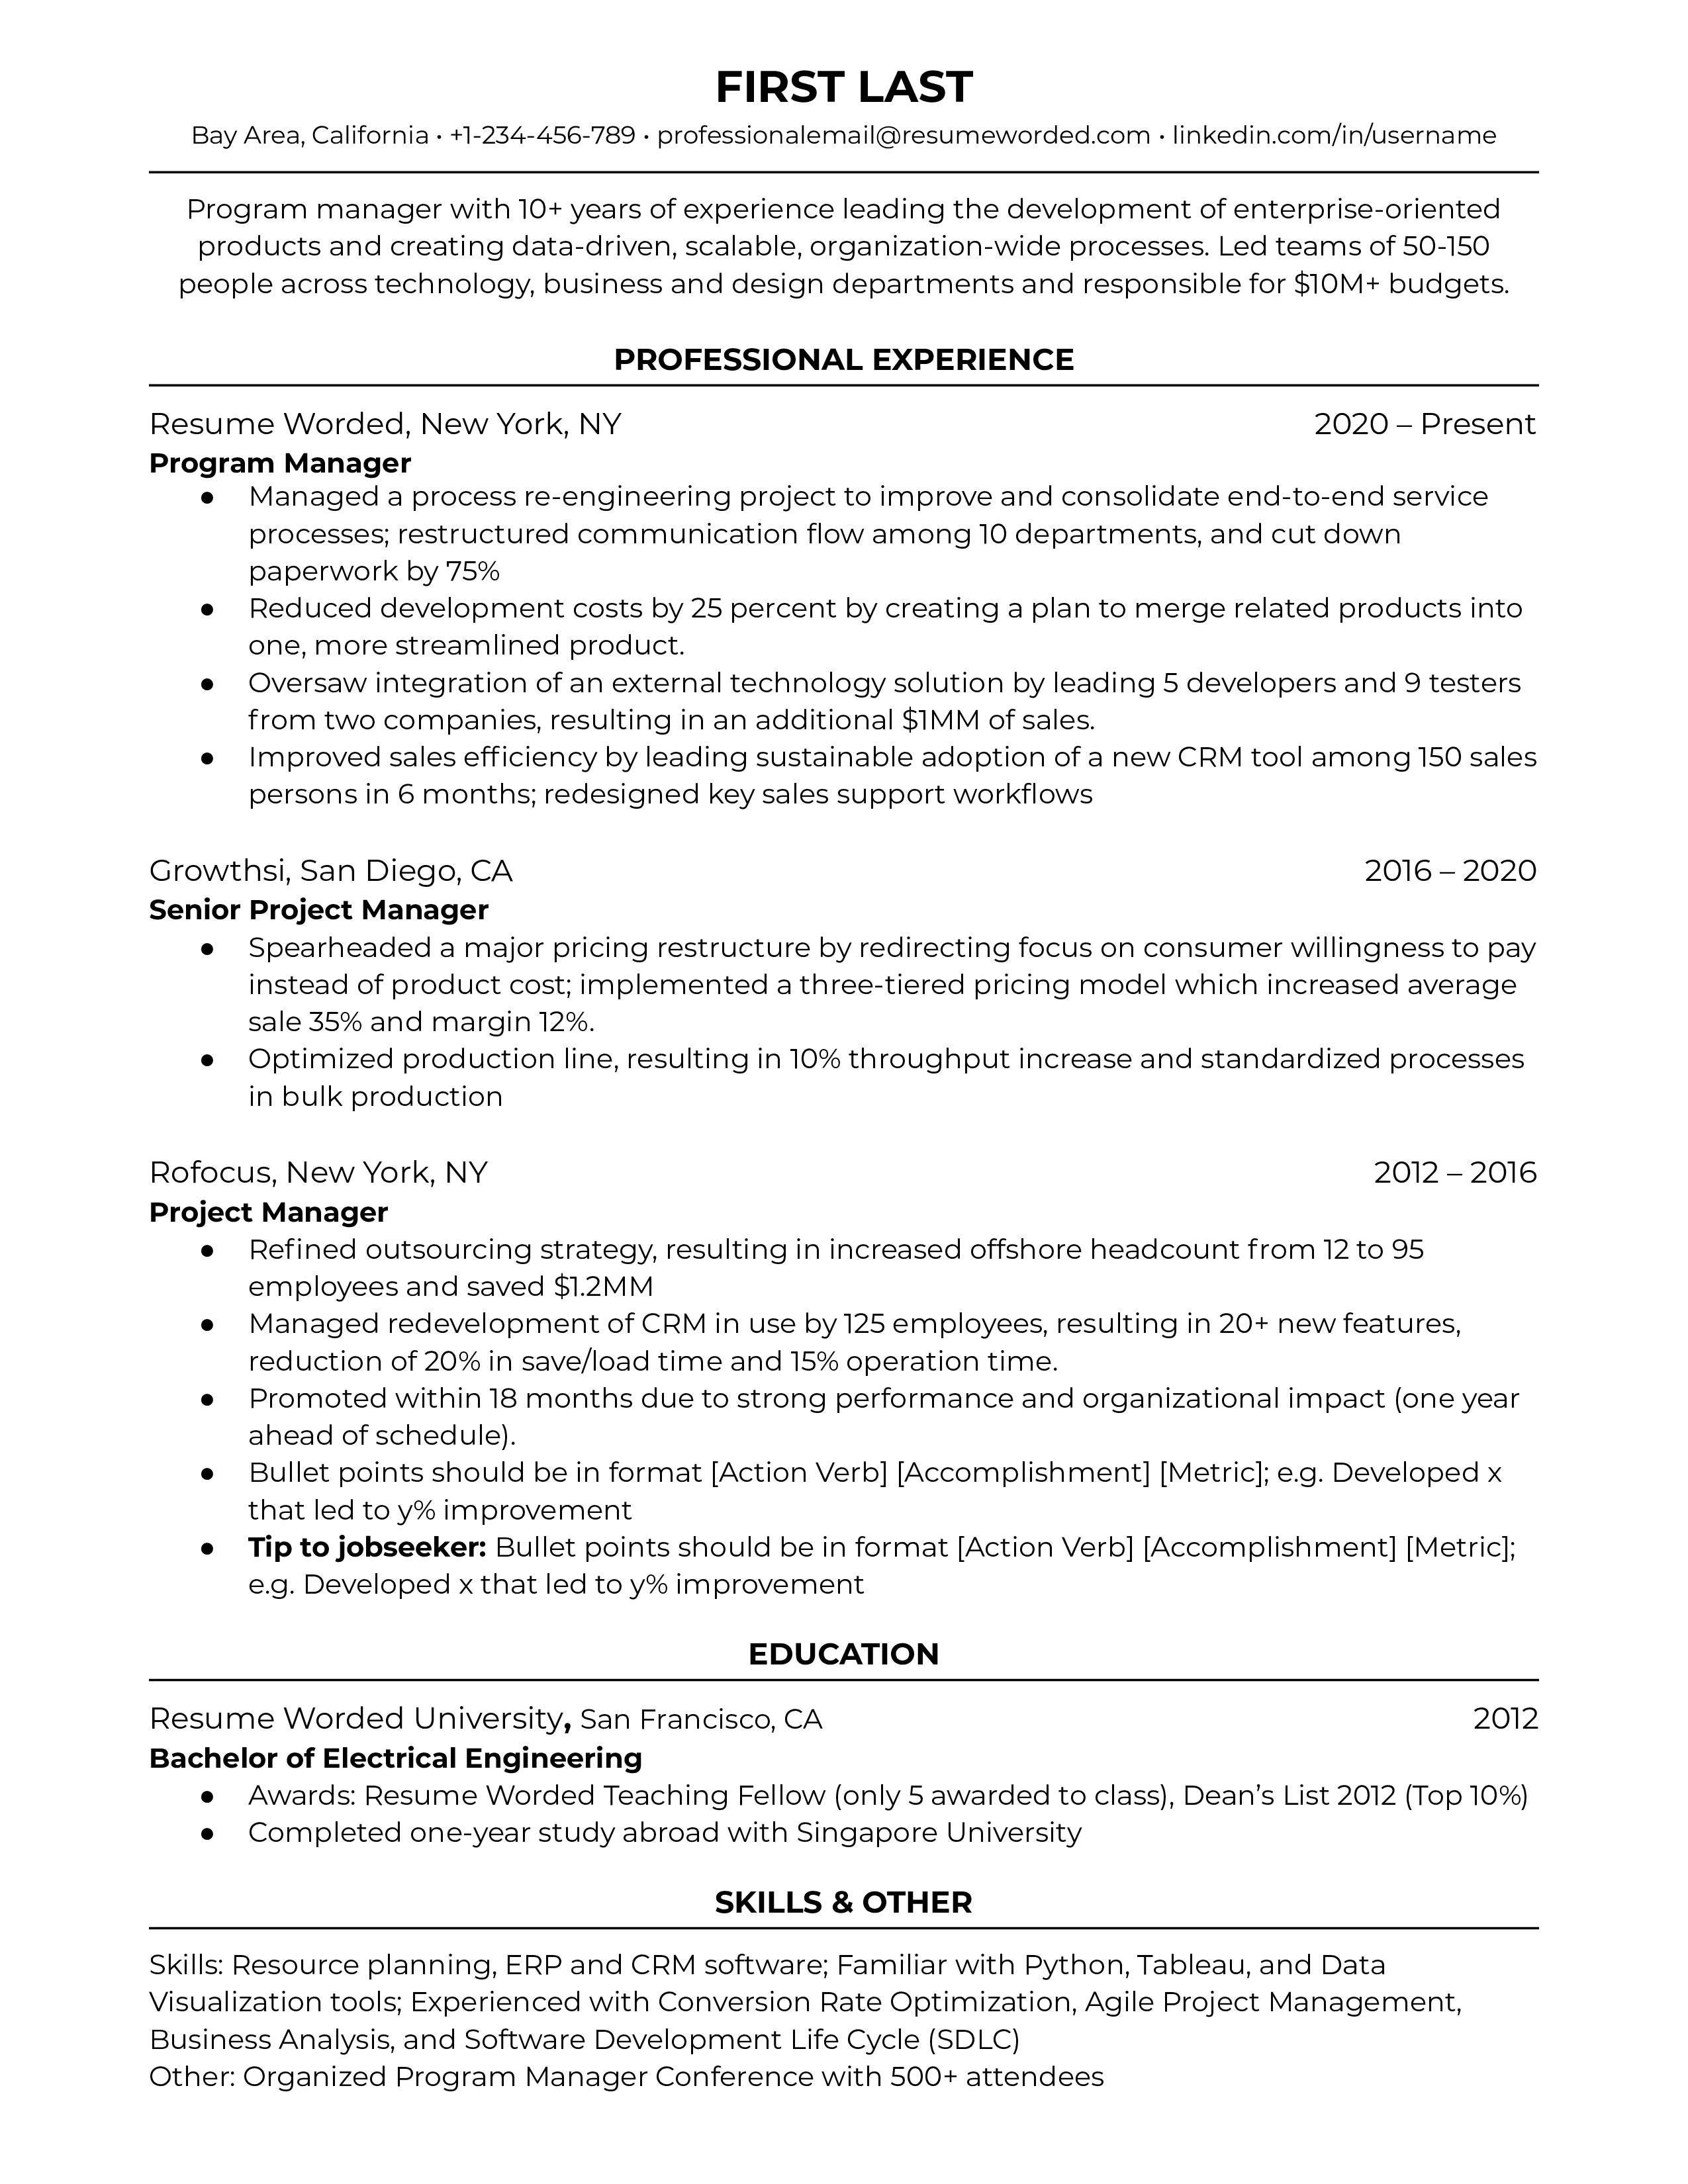 A detailed CV of a Program Manager showcasing strategic and problem-solving skills.